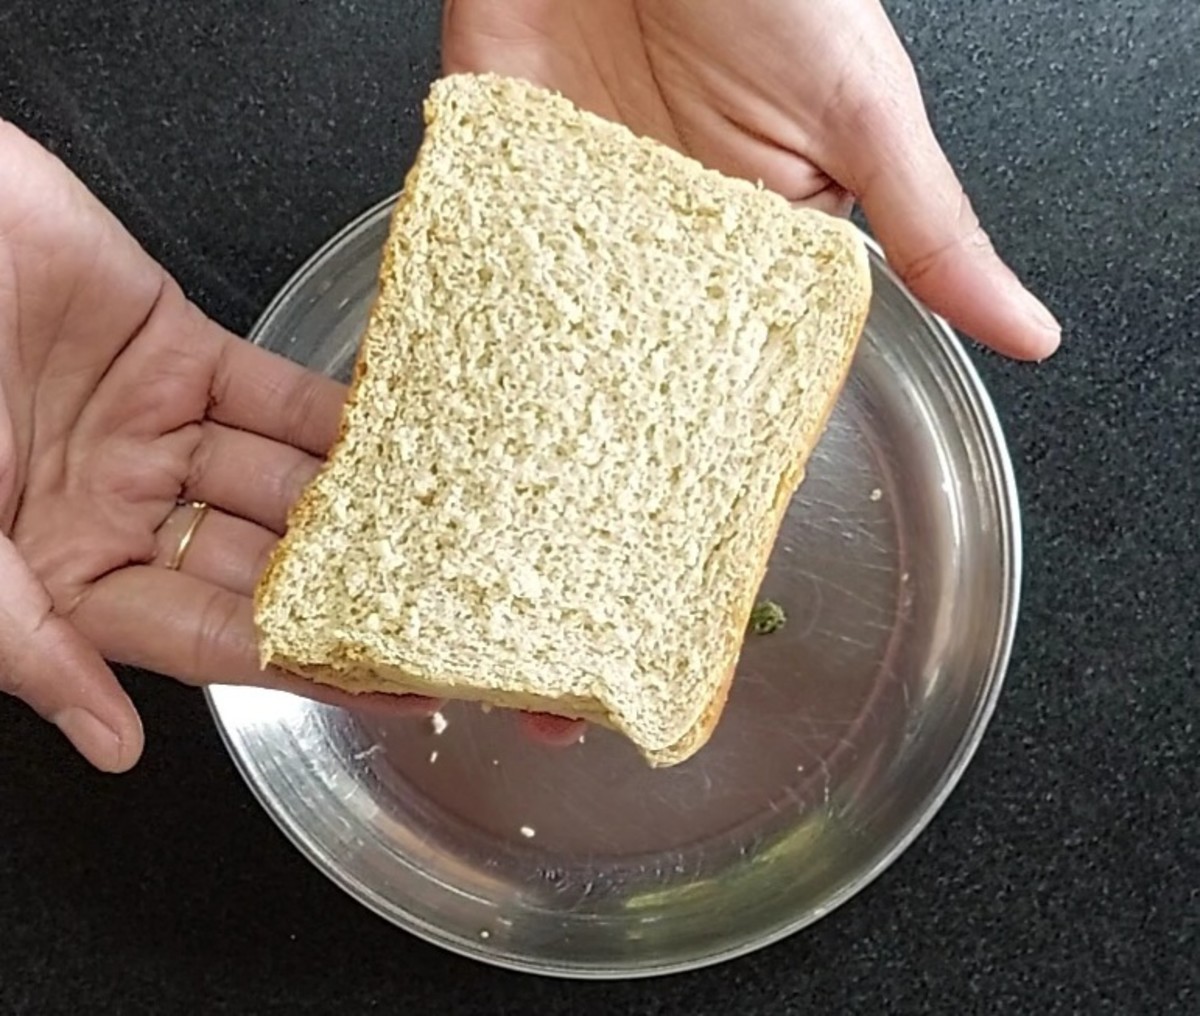 Close another bread slice and press gently.